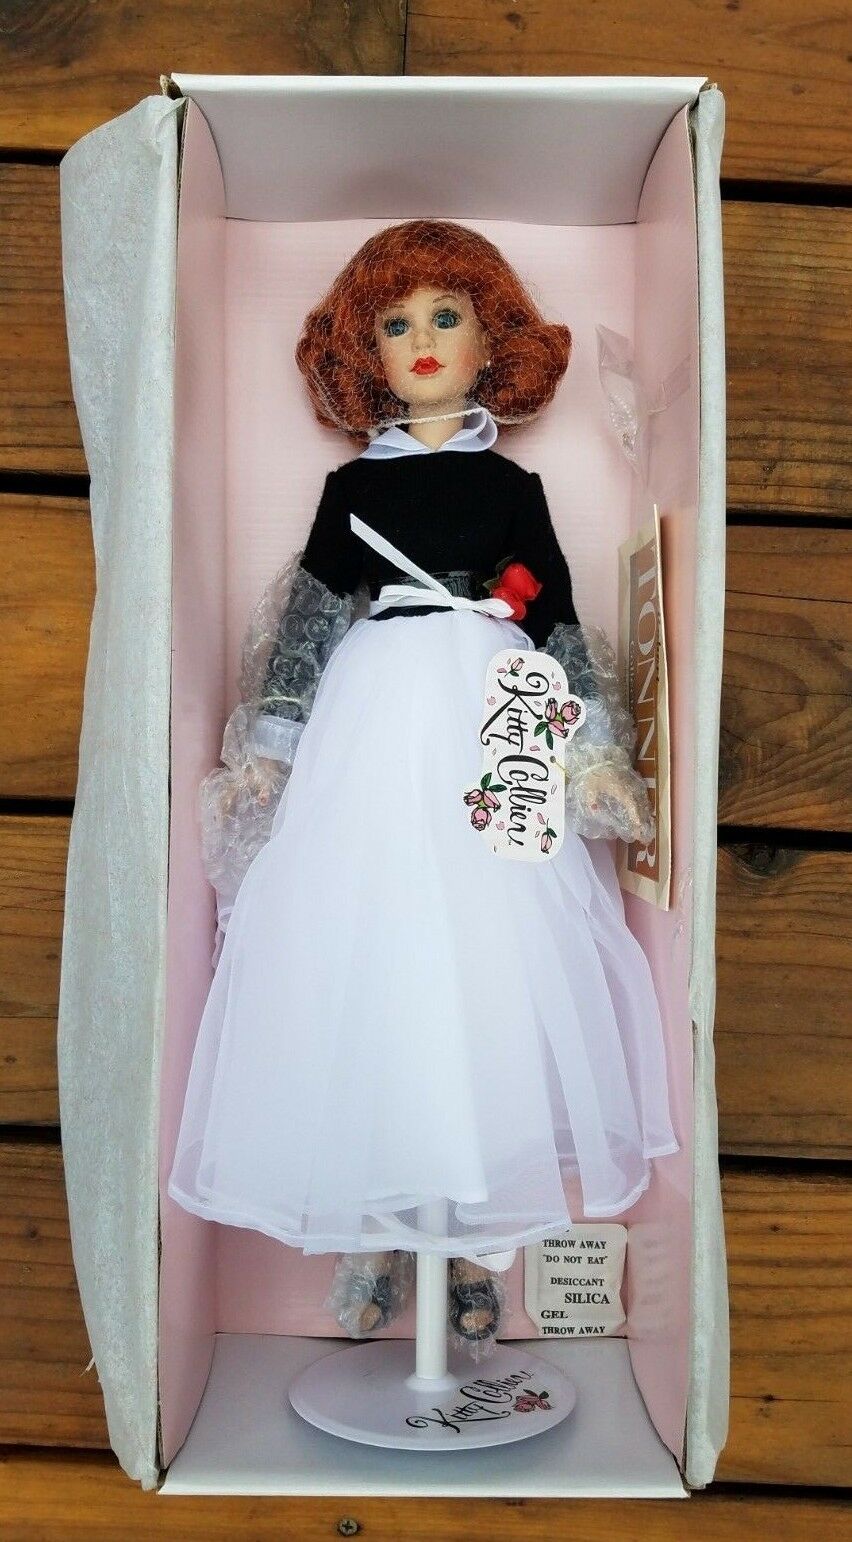 Kitty Collier American Beauty 18" Tonner Doll